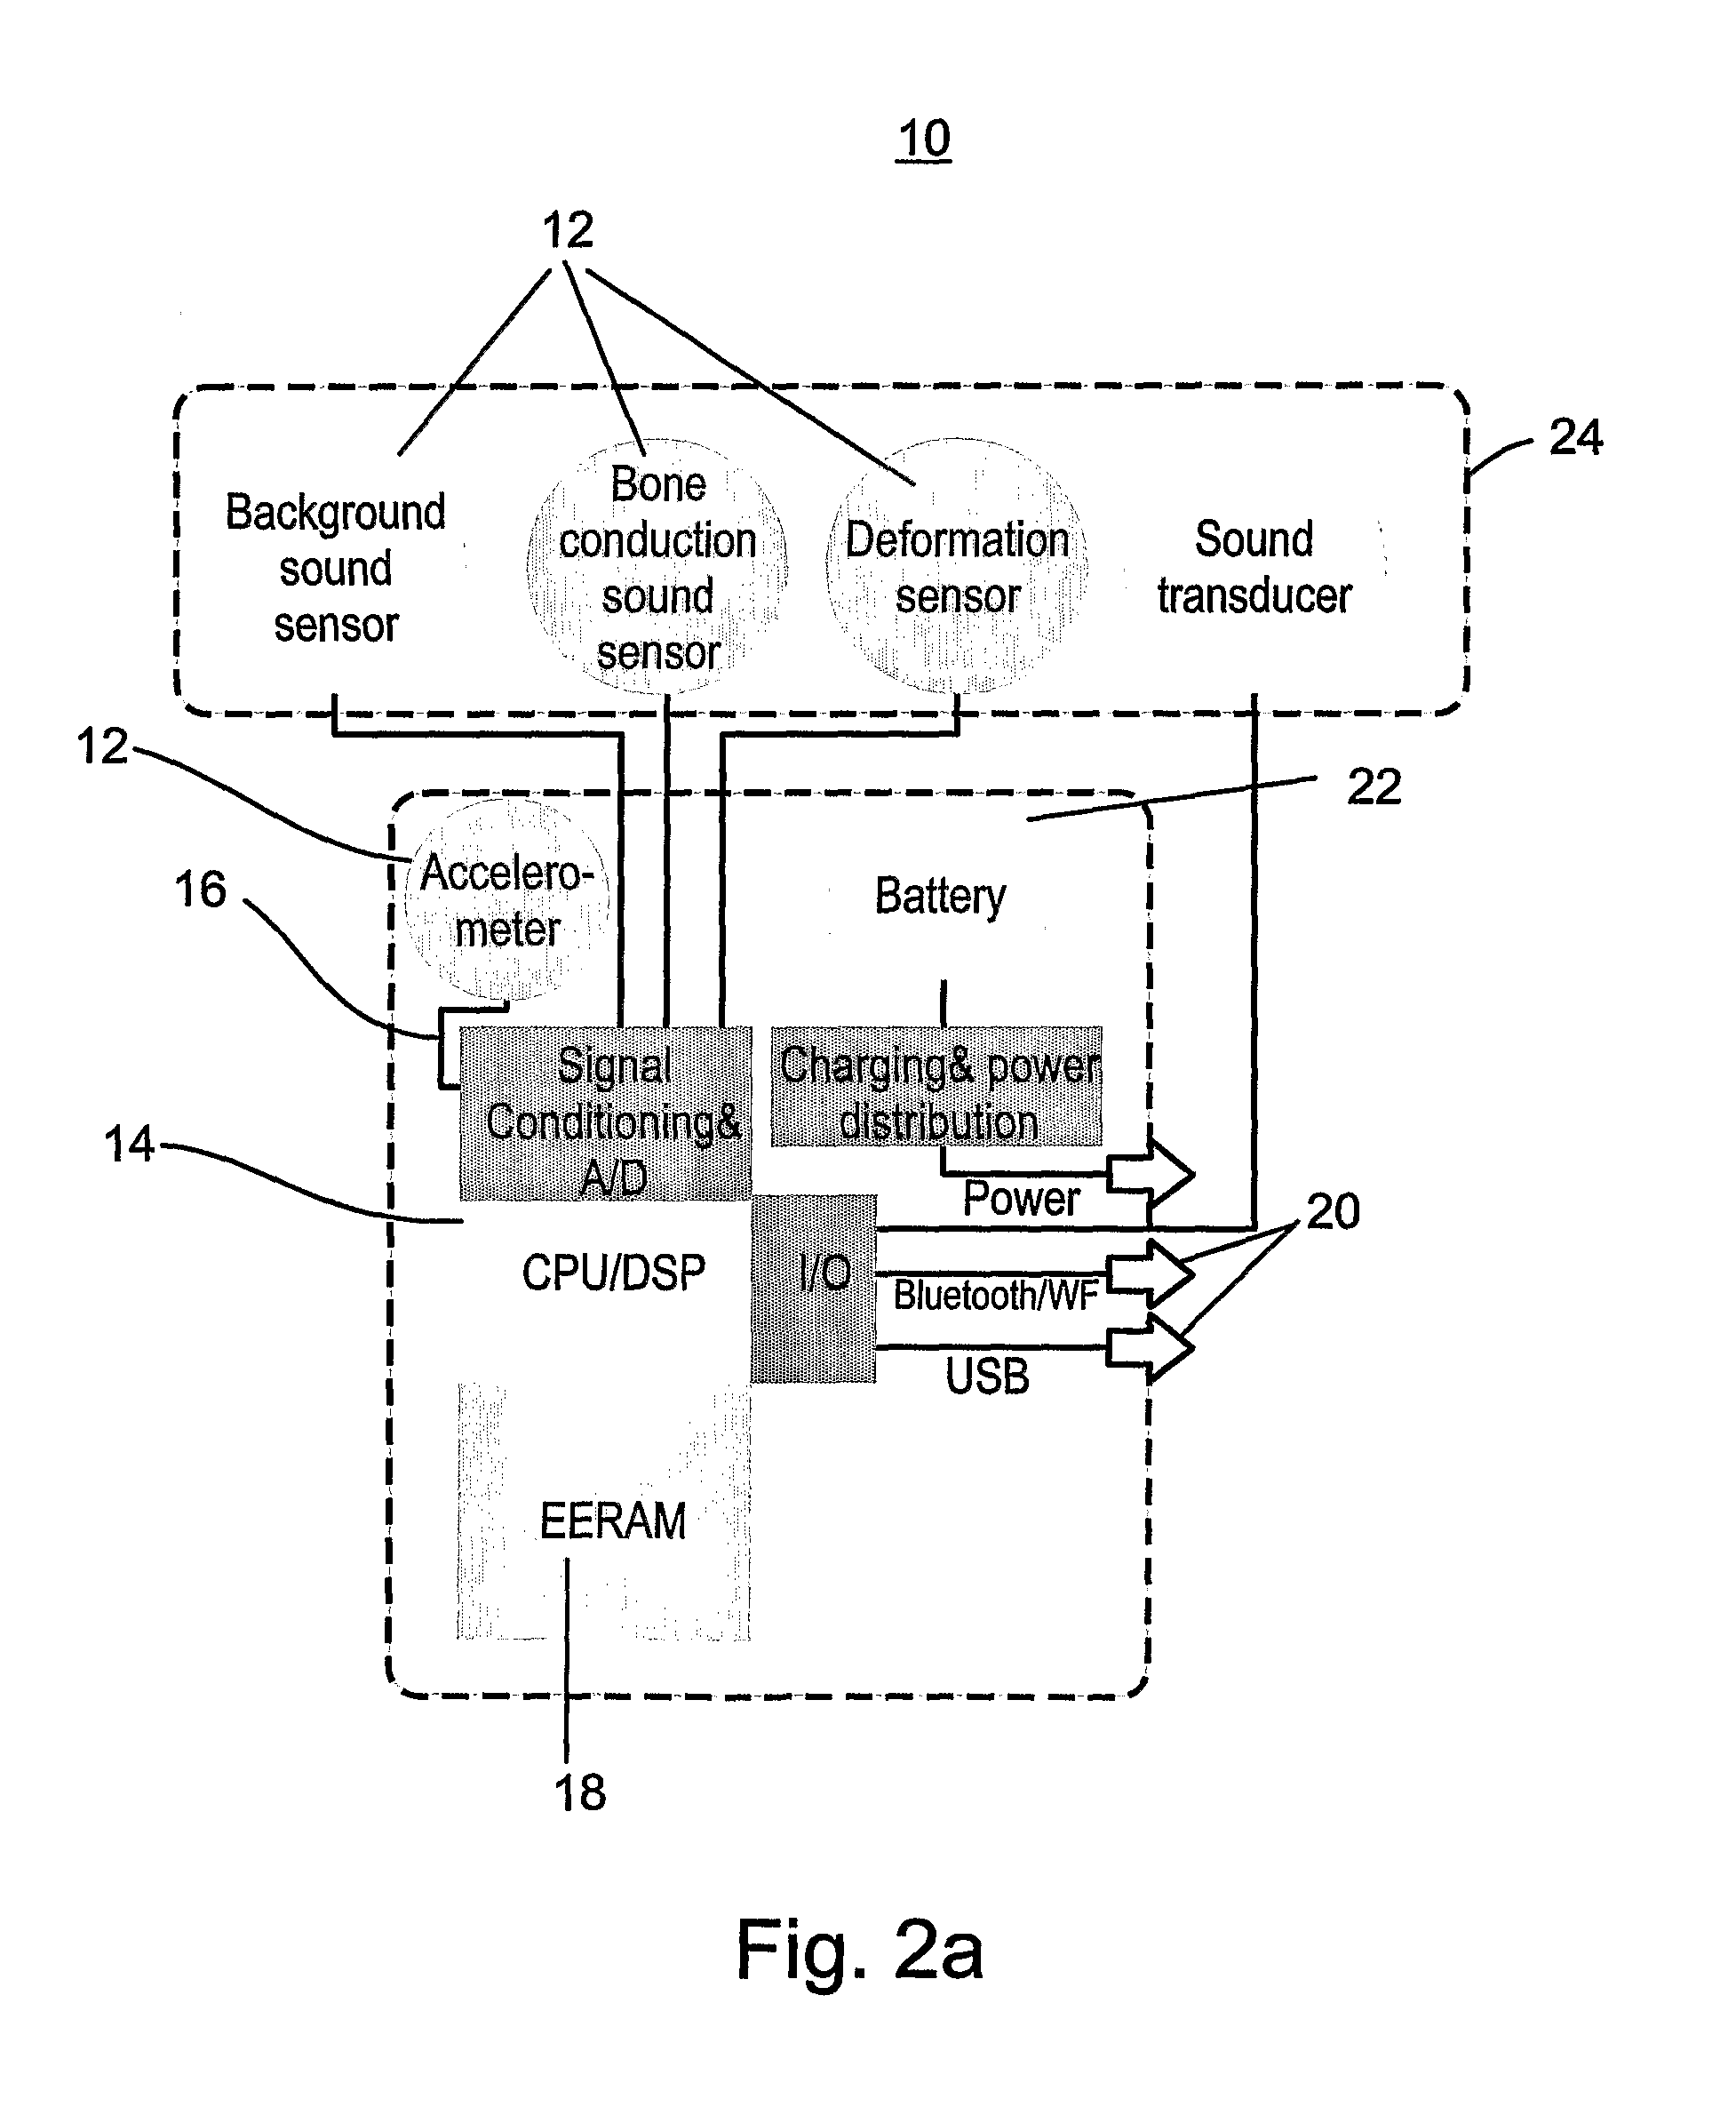 Device for monitoring and modifying eating behavior